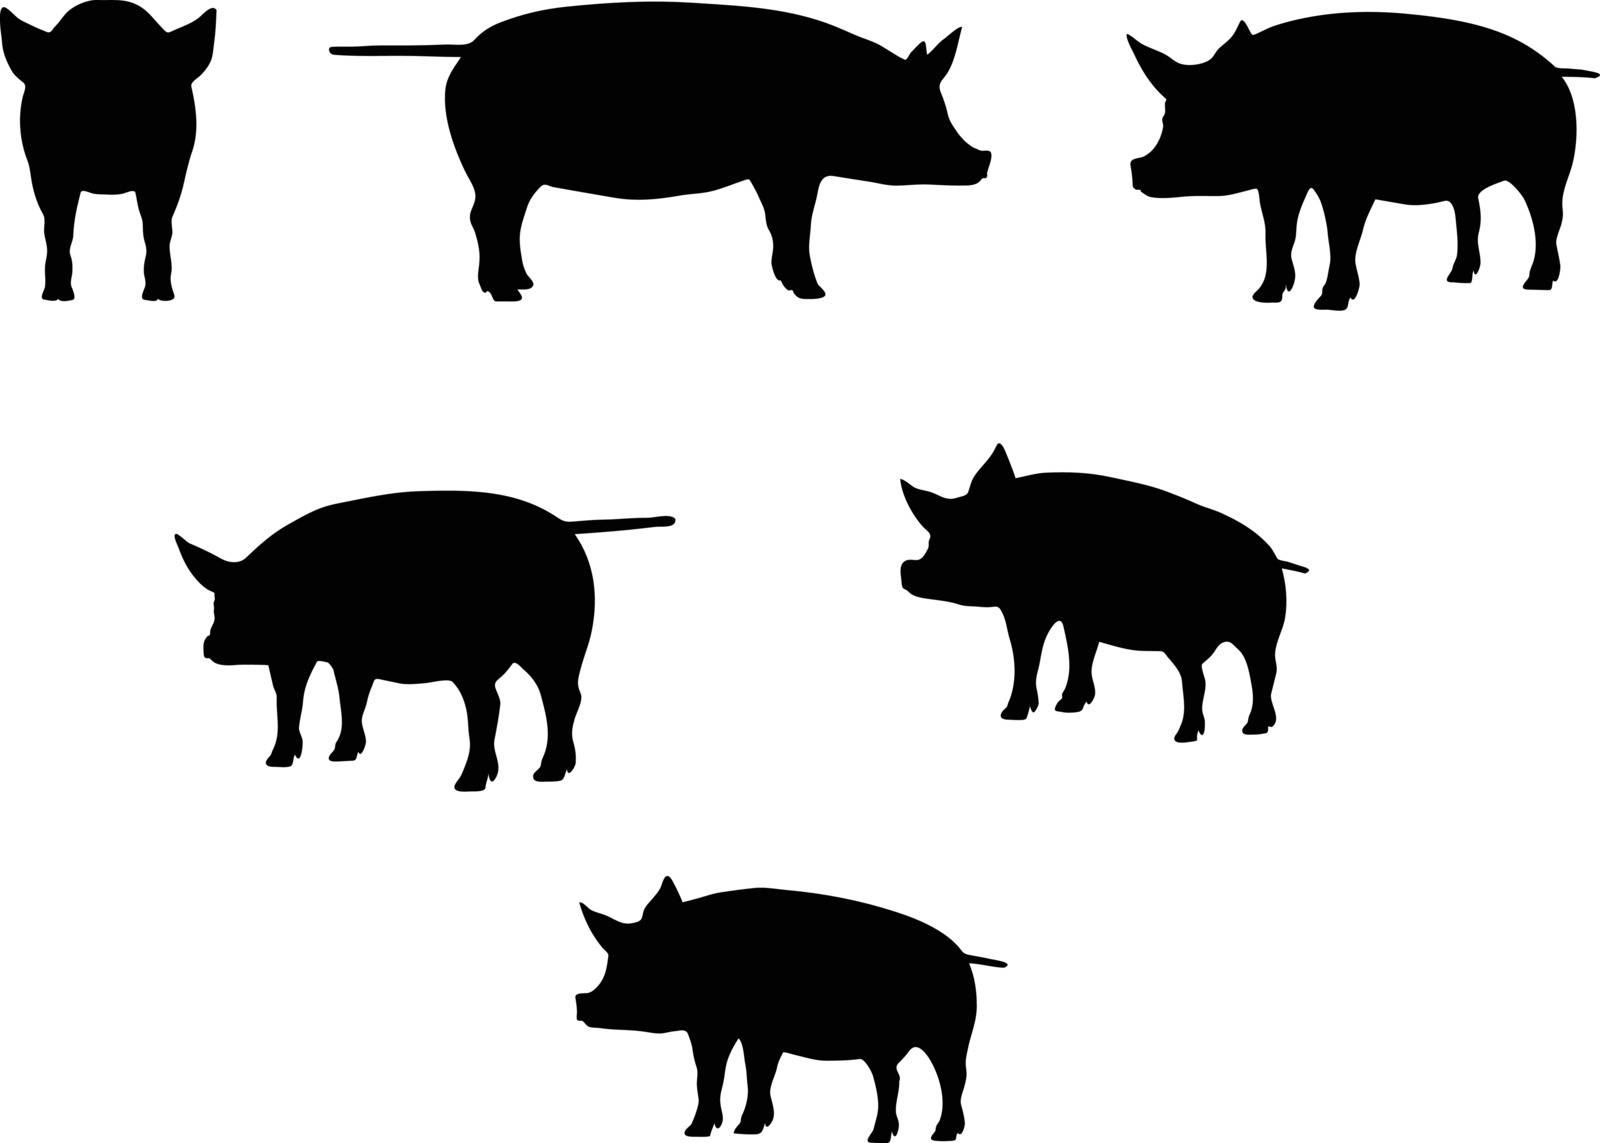 Vector Image, pig silhouette, in a standing position, isolated on white background
